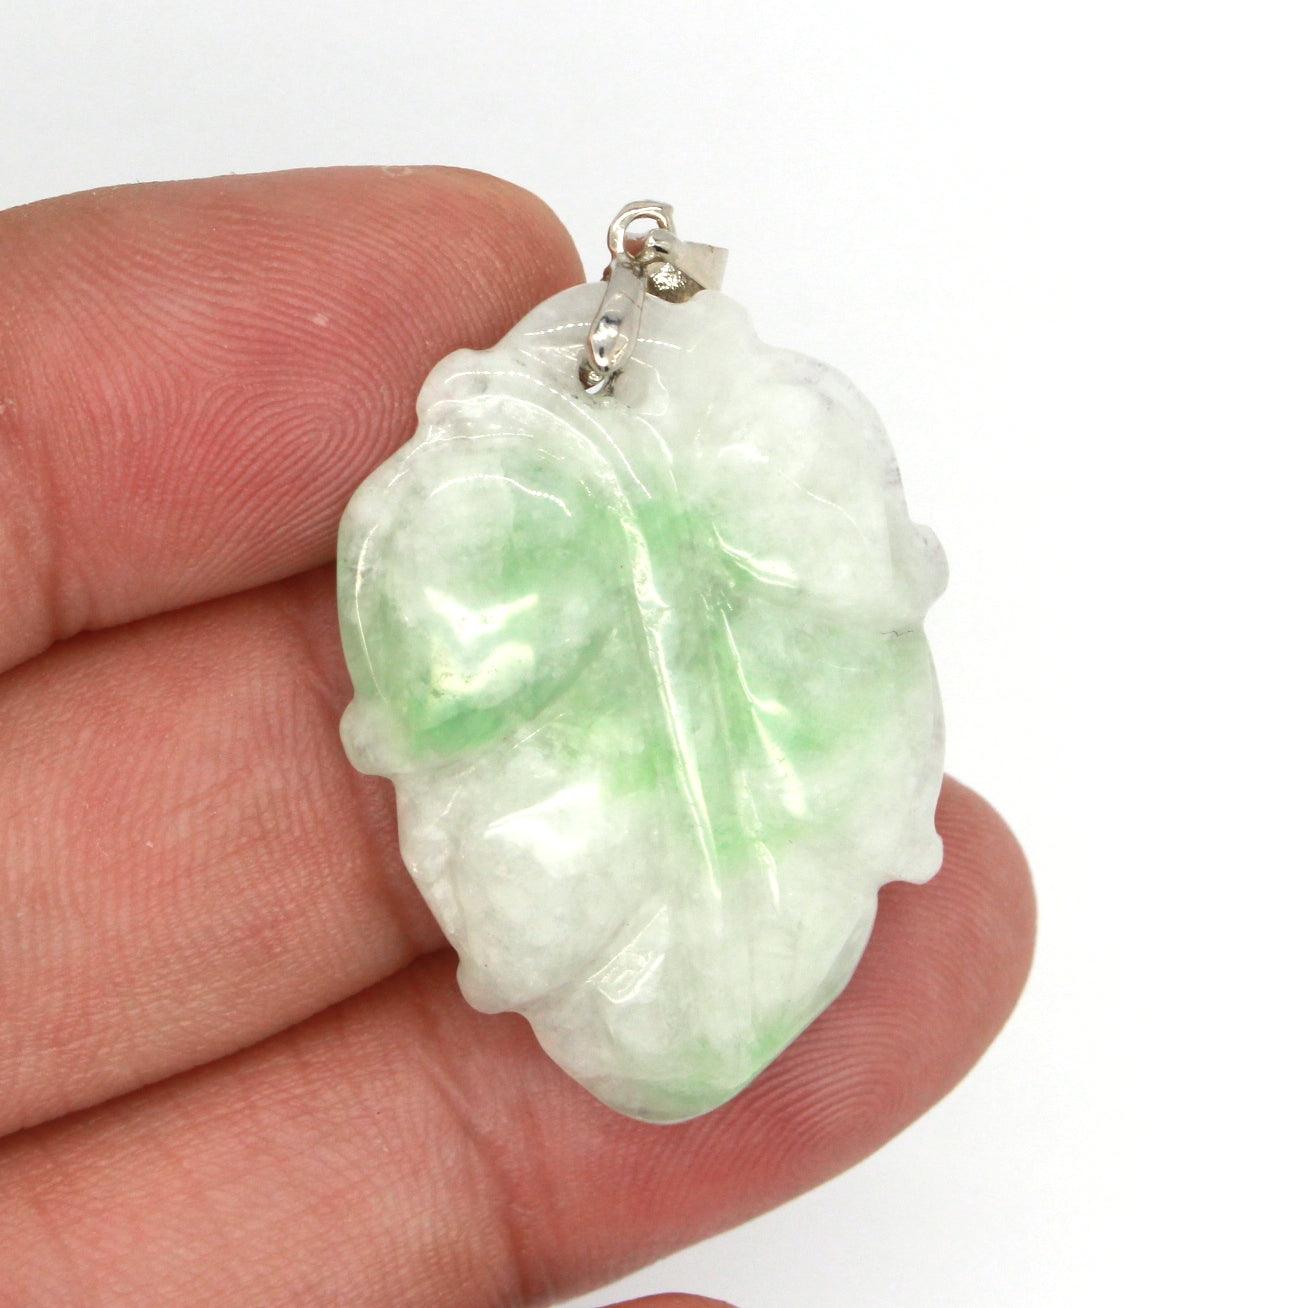 Type A Jadeite Jade Leaf Pendant Series (Fullfill USA only) B08QJDMZF6